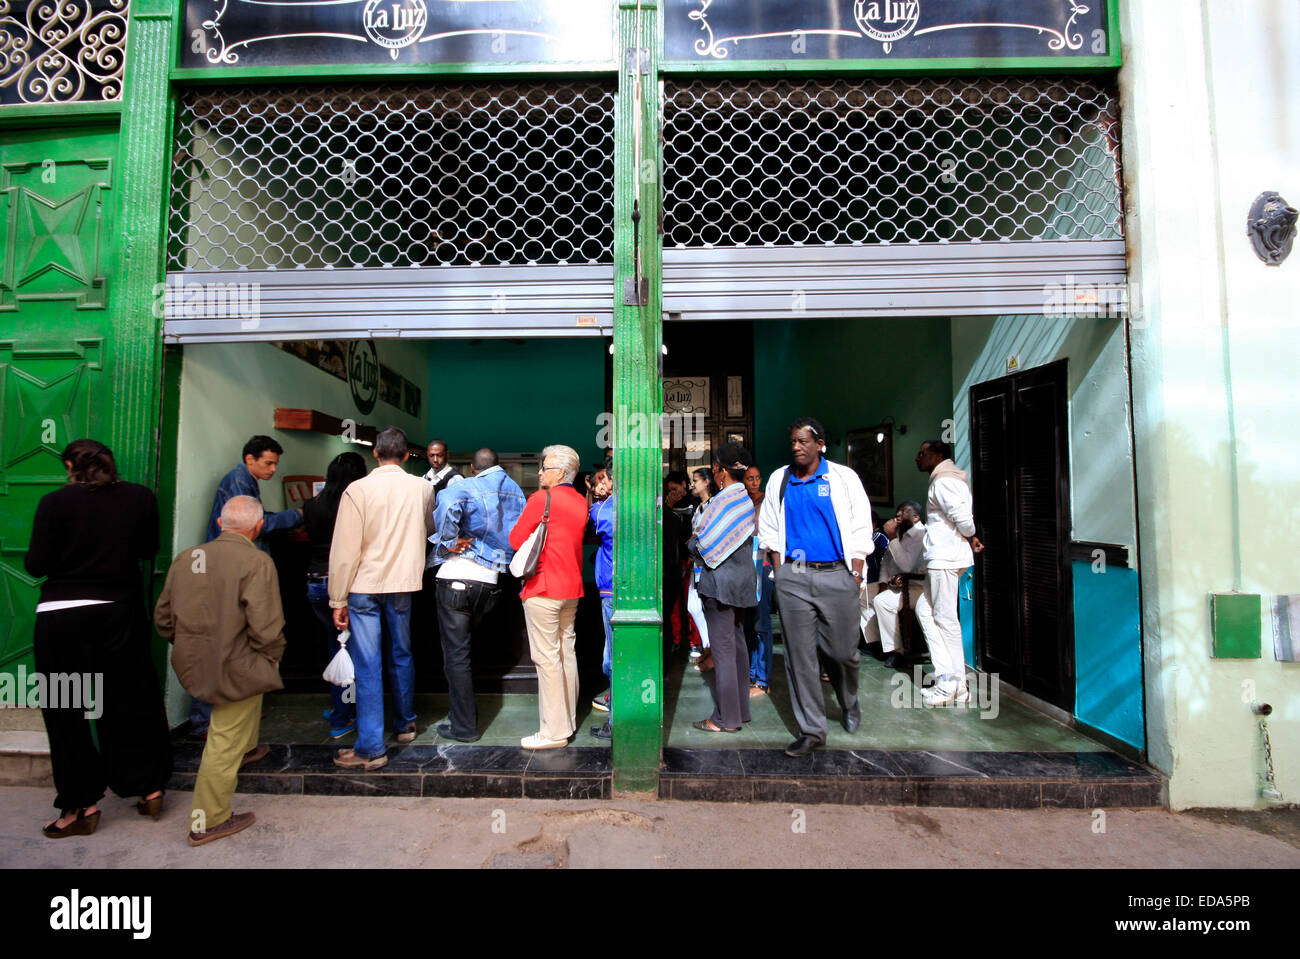 Queuing for a morning coffee at the old La Luz Coffee Shop in old Havana, Cuba Stock Photo